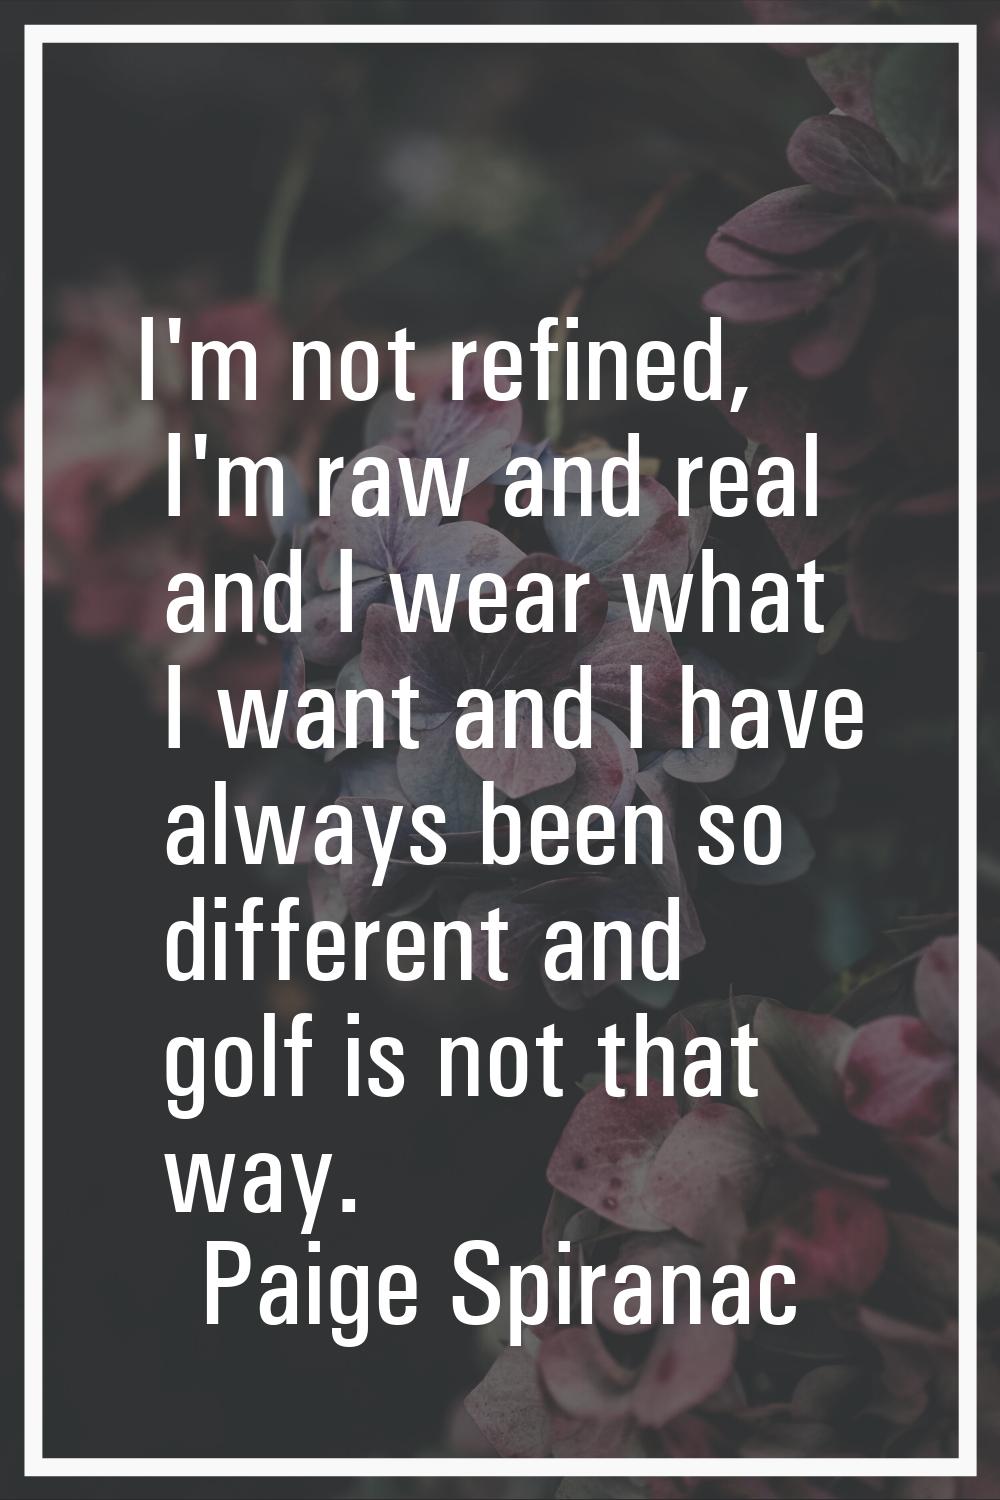 I'm not refined, I'm raw and real and I wear what I want and I have always been so different and go